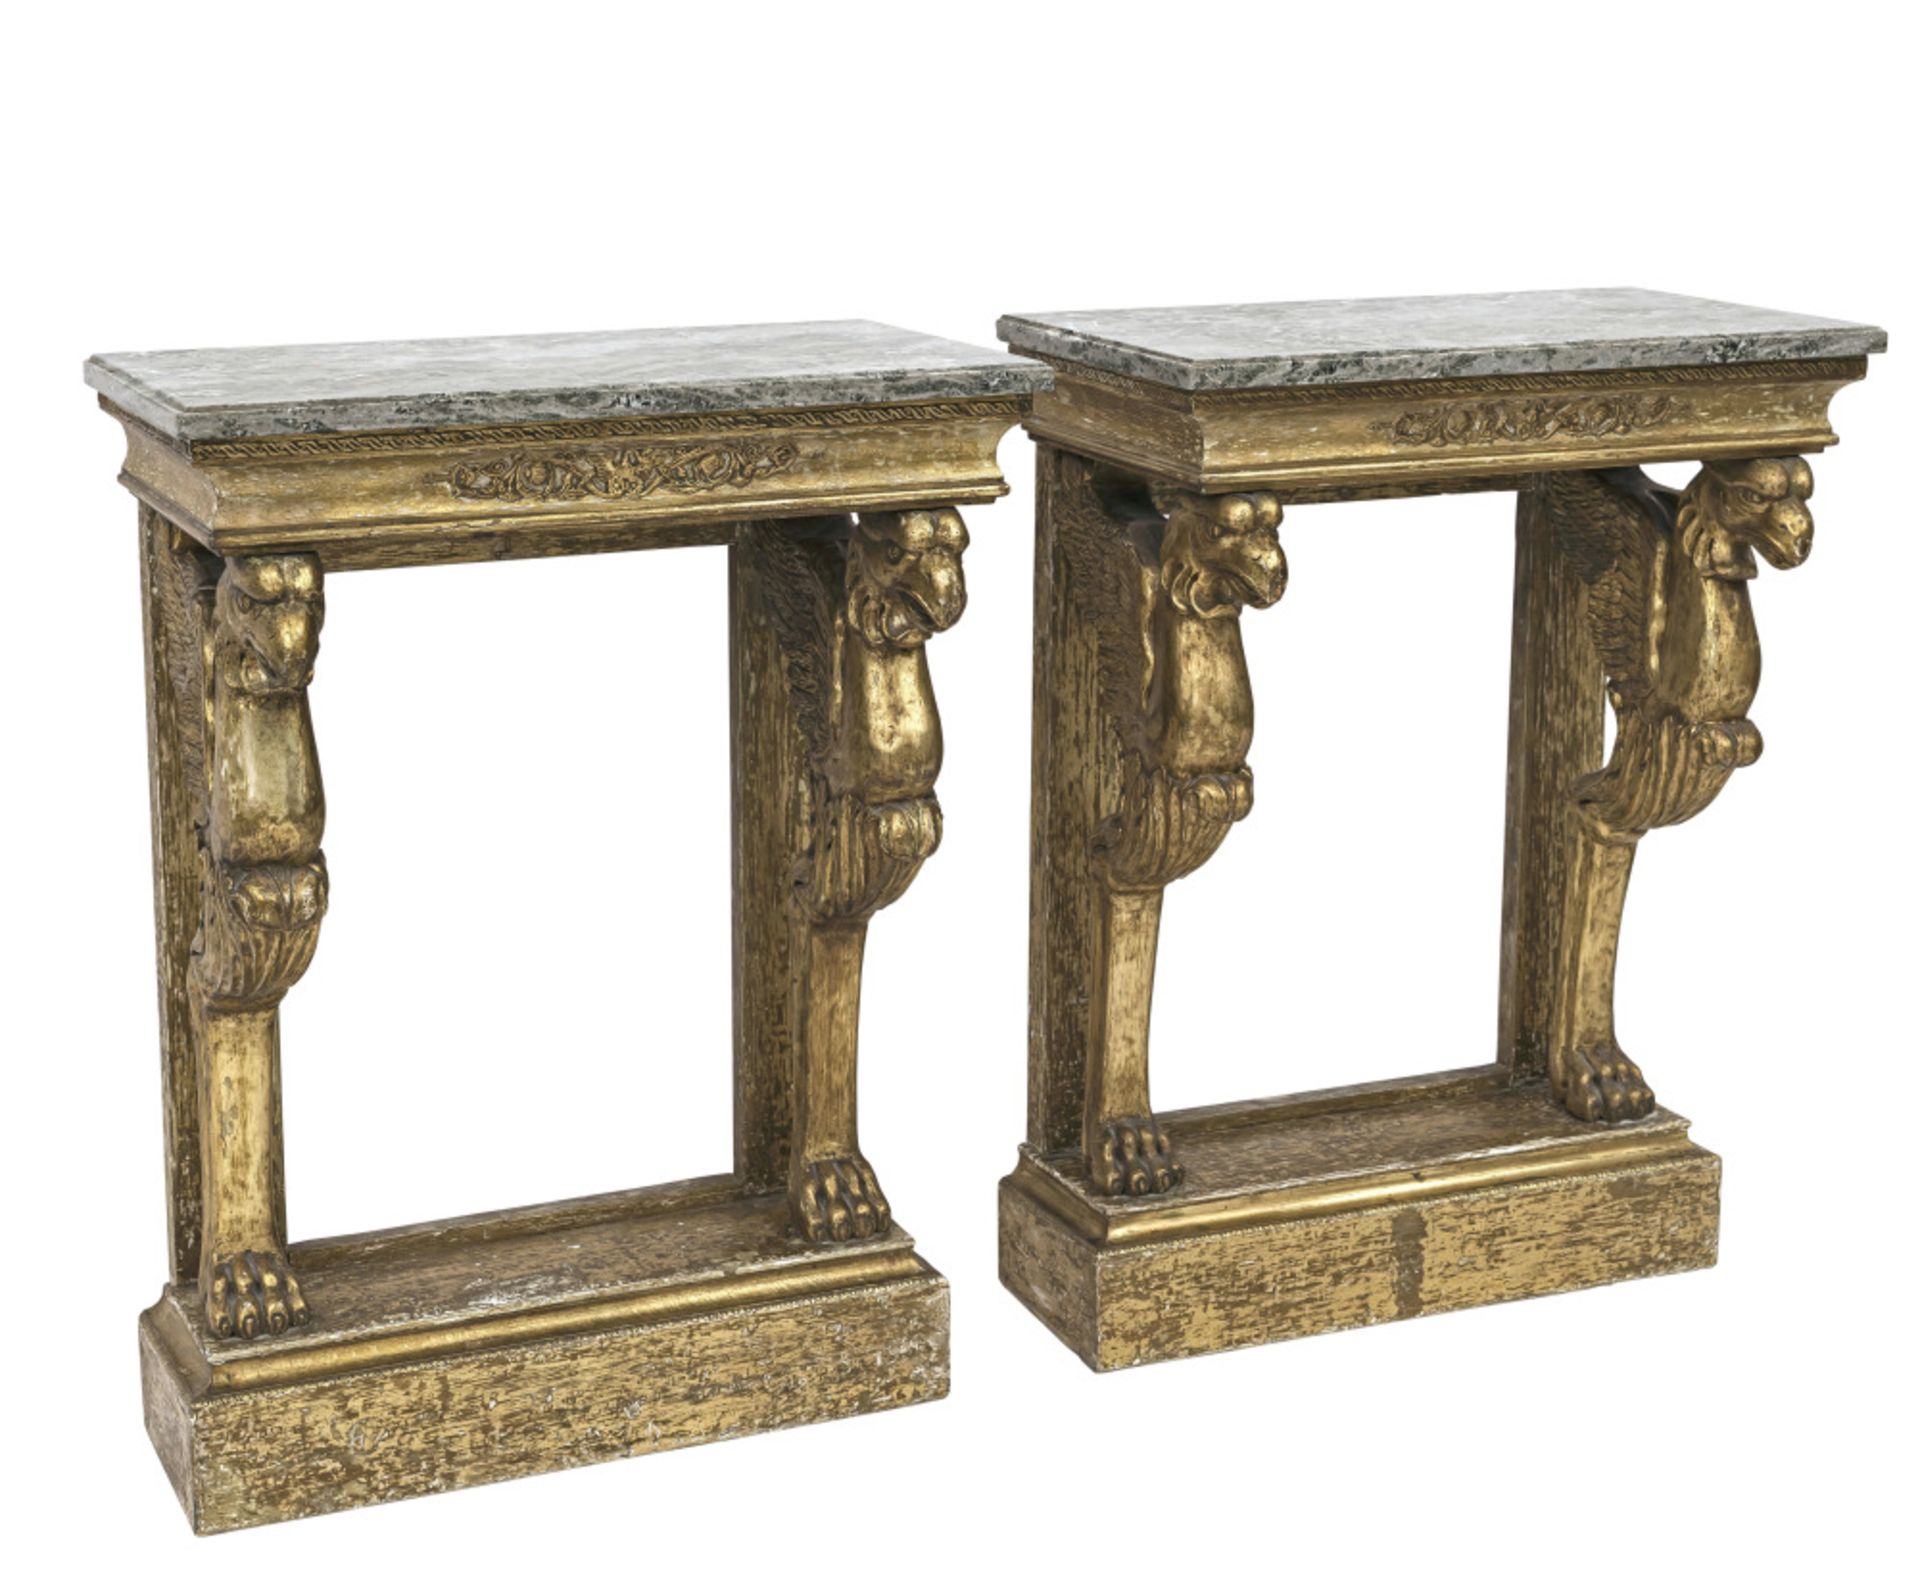 A pair of console tables - Denmark, 19th century and later